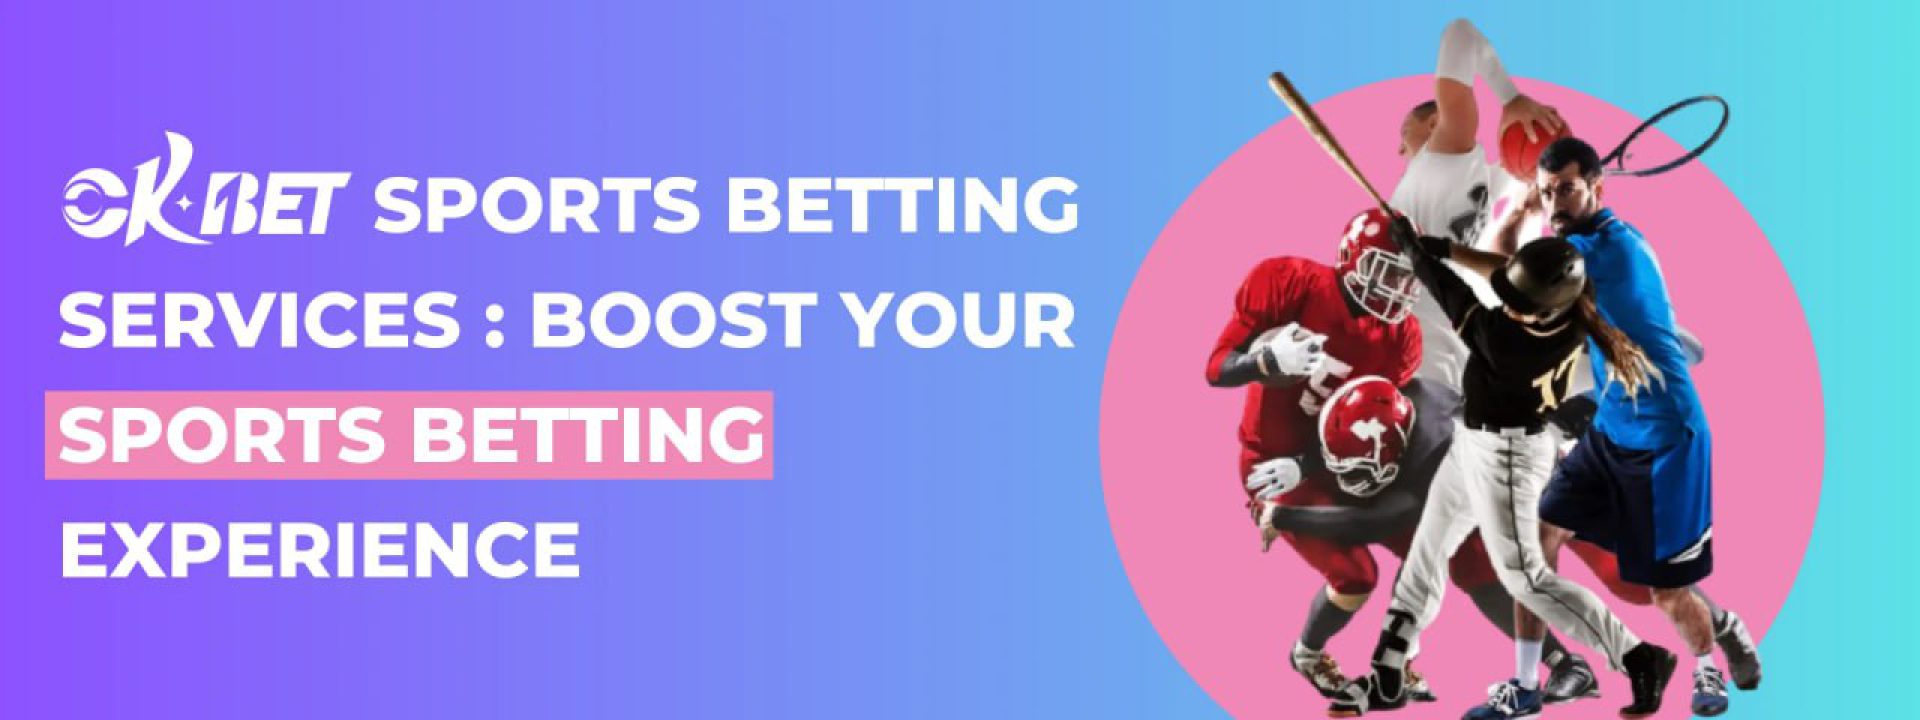 OKBET Sports Betting Services: Boost Your Sports Betting Experience